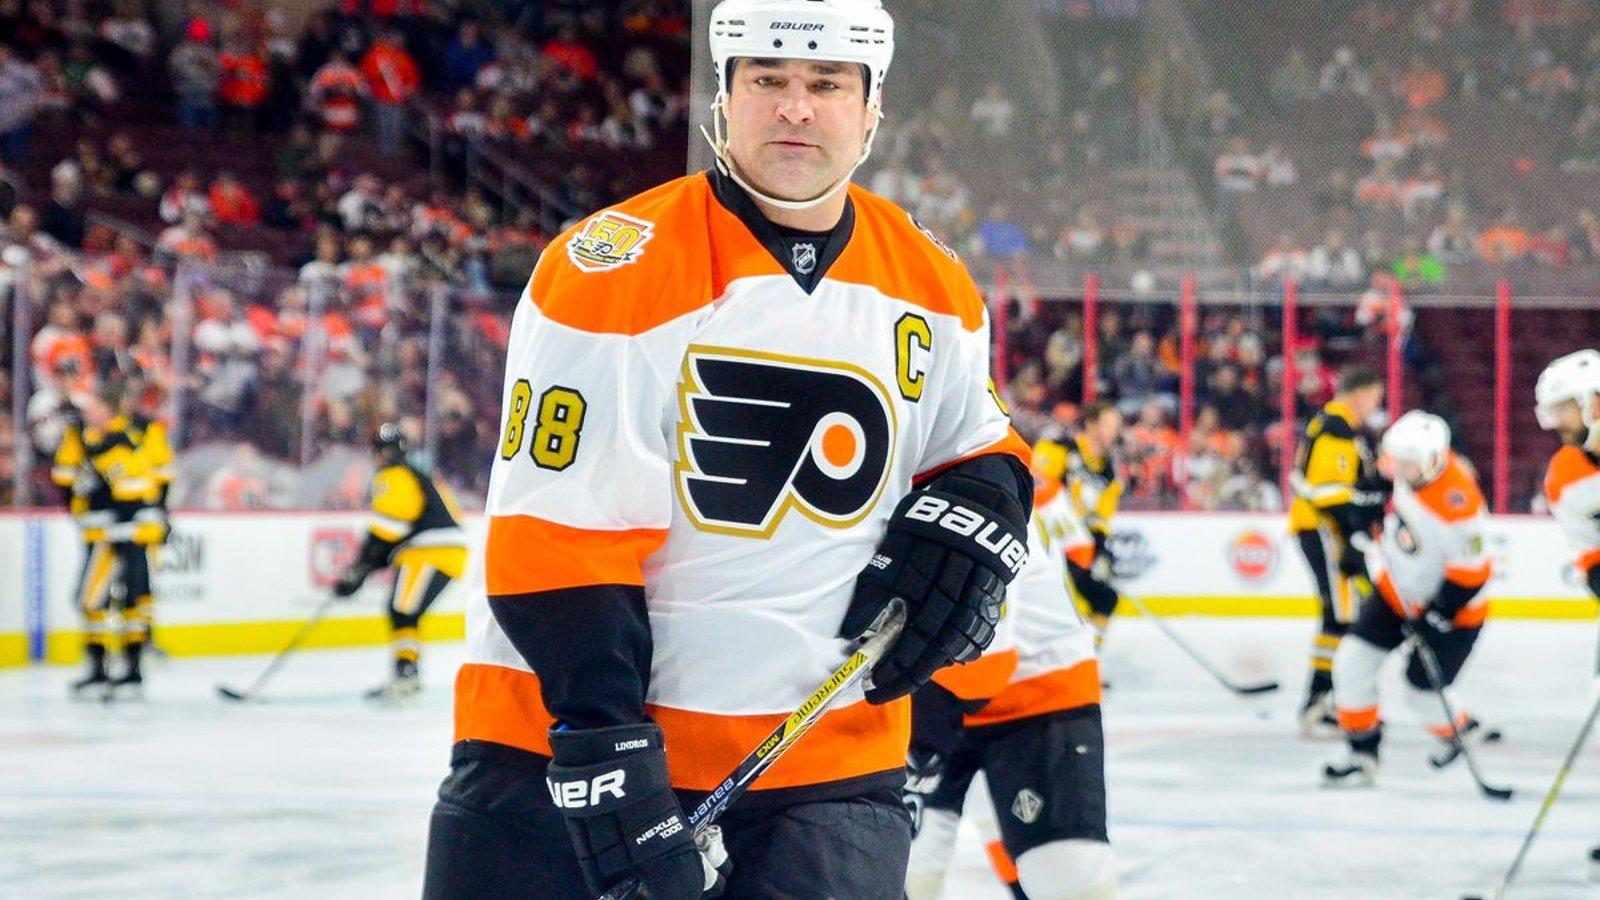 Eric Lindros returns to the Flyers! 